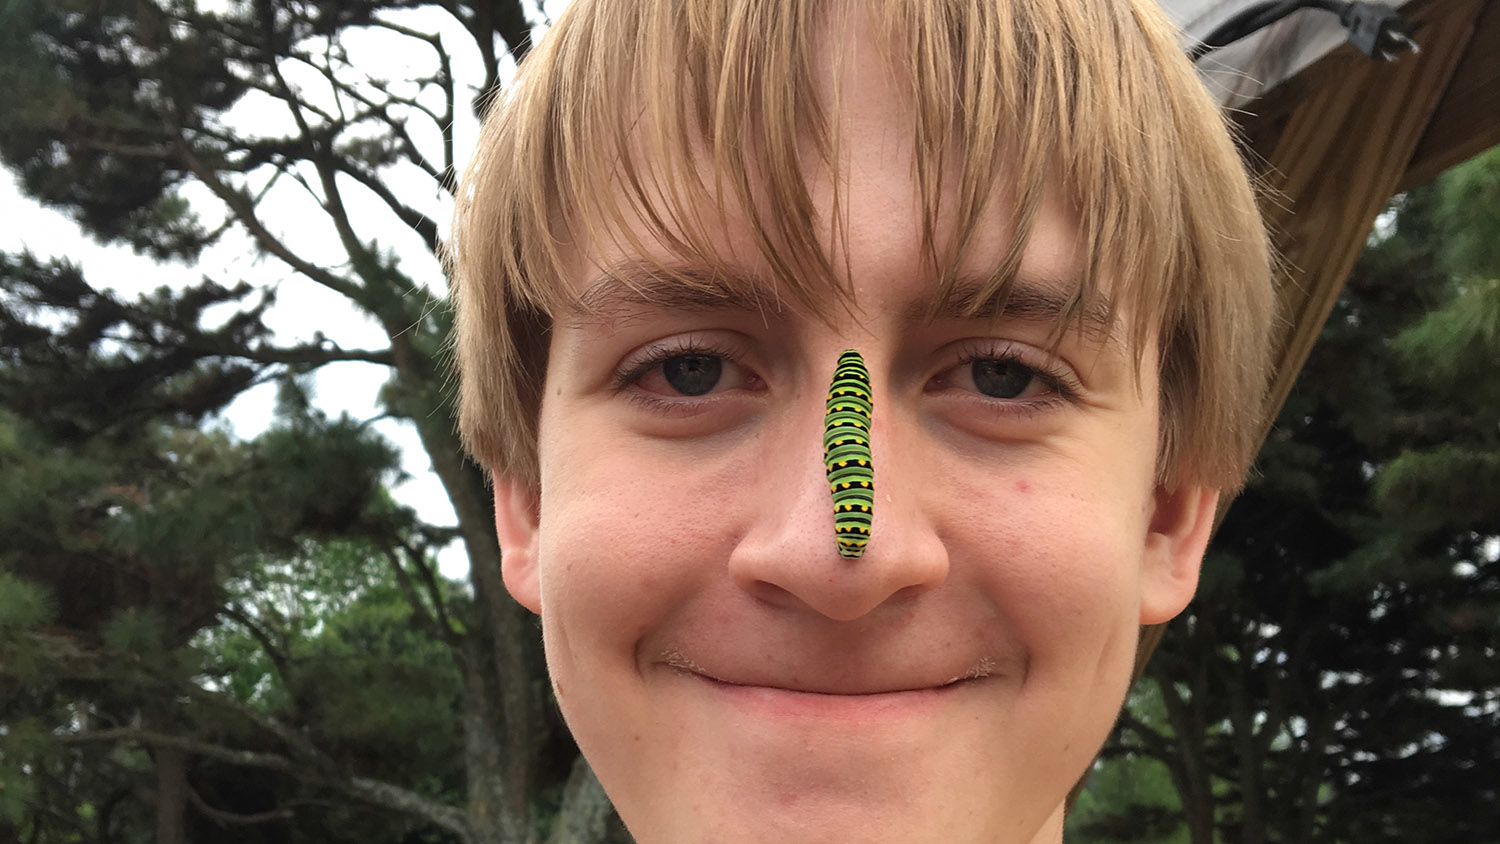 Child with caterpillar on his nose.